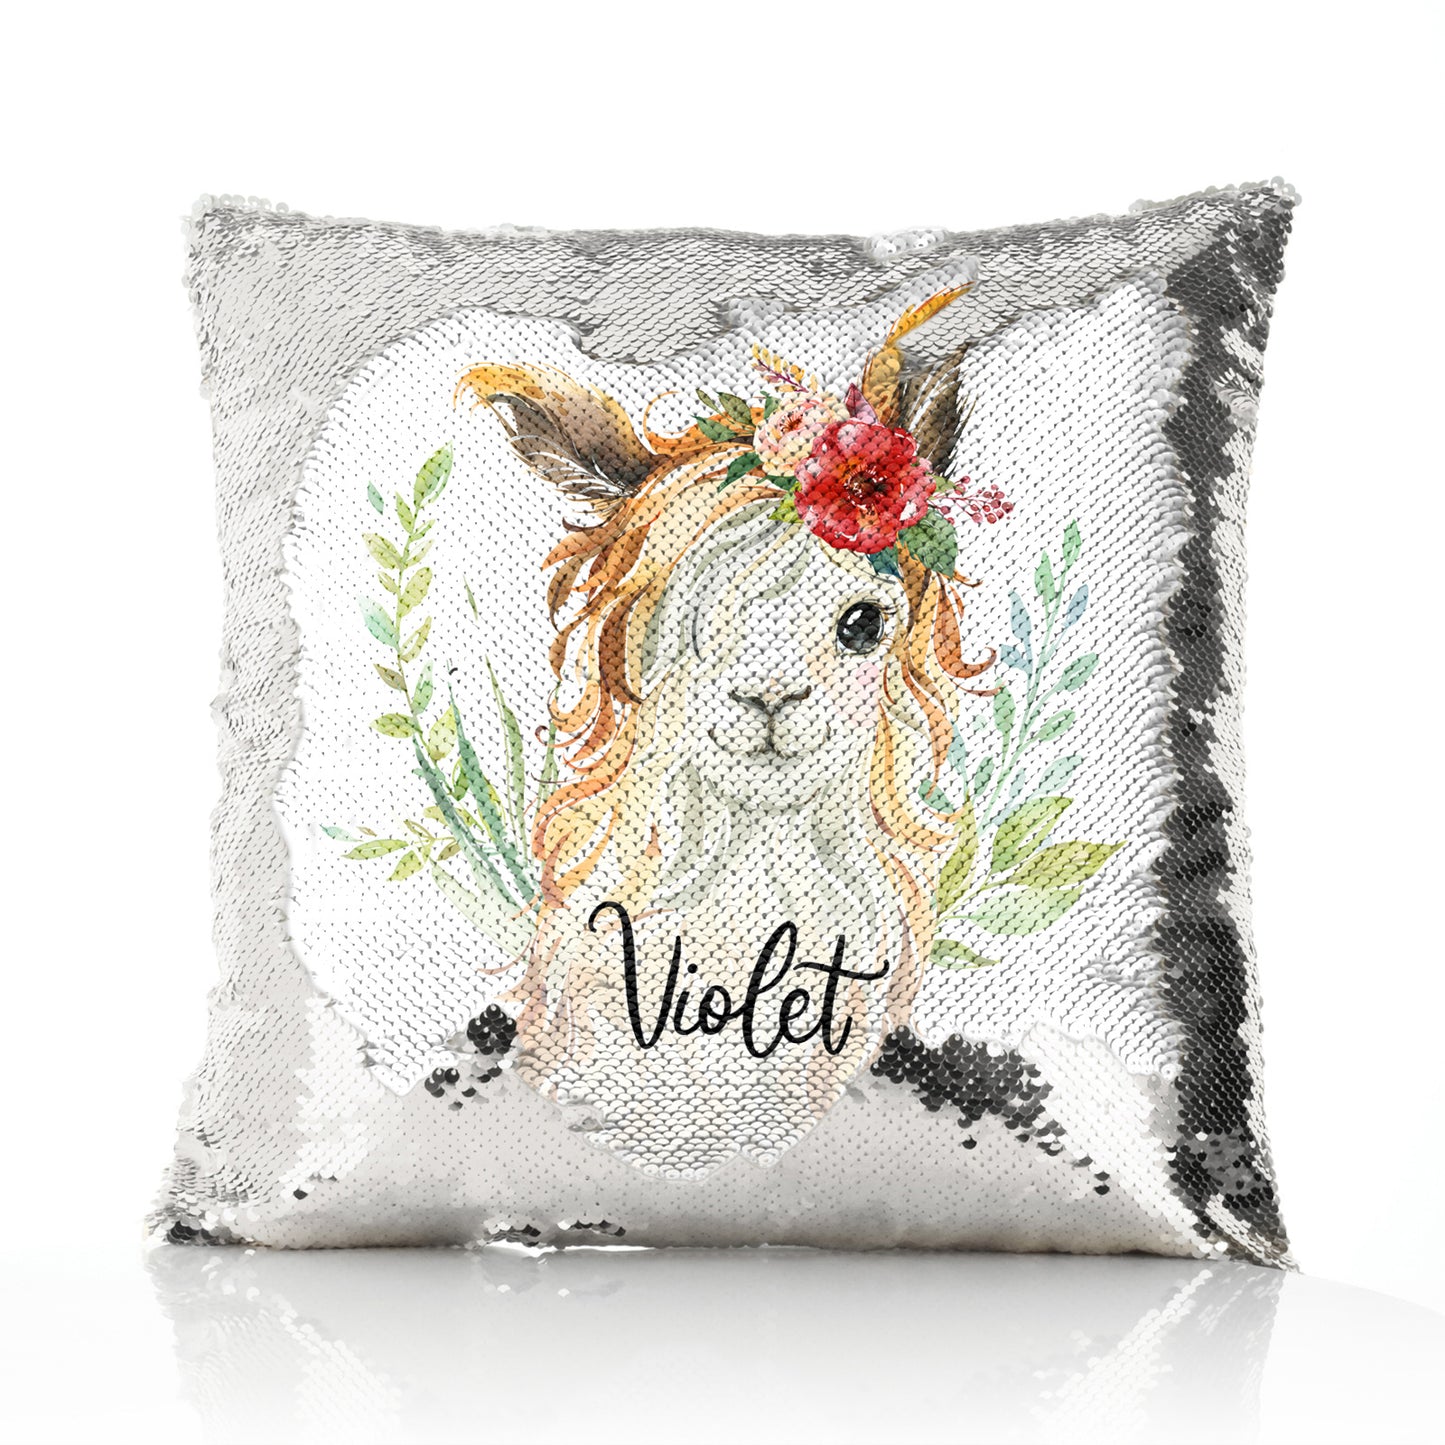 Personalised Sequin Cushion with White Goat with Red Flower Hair and Cute Text